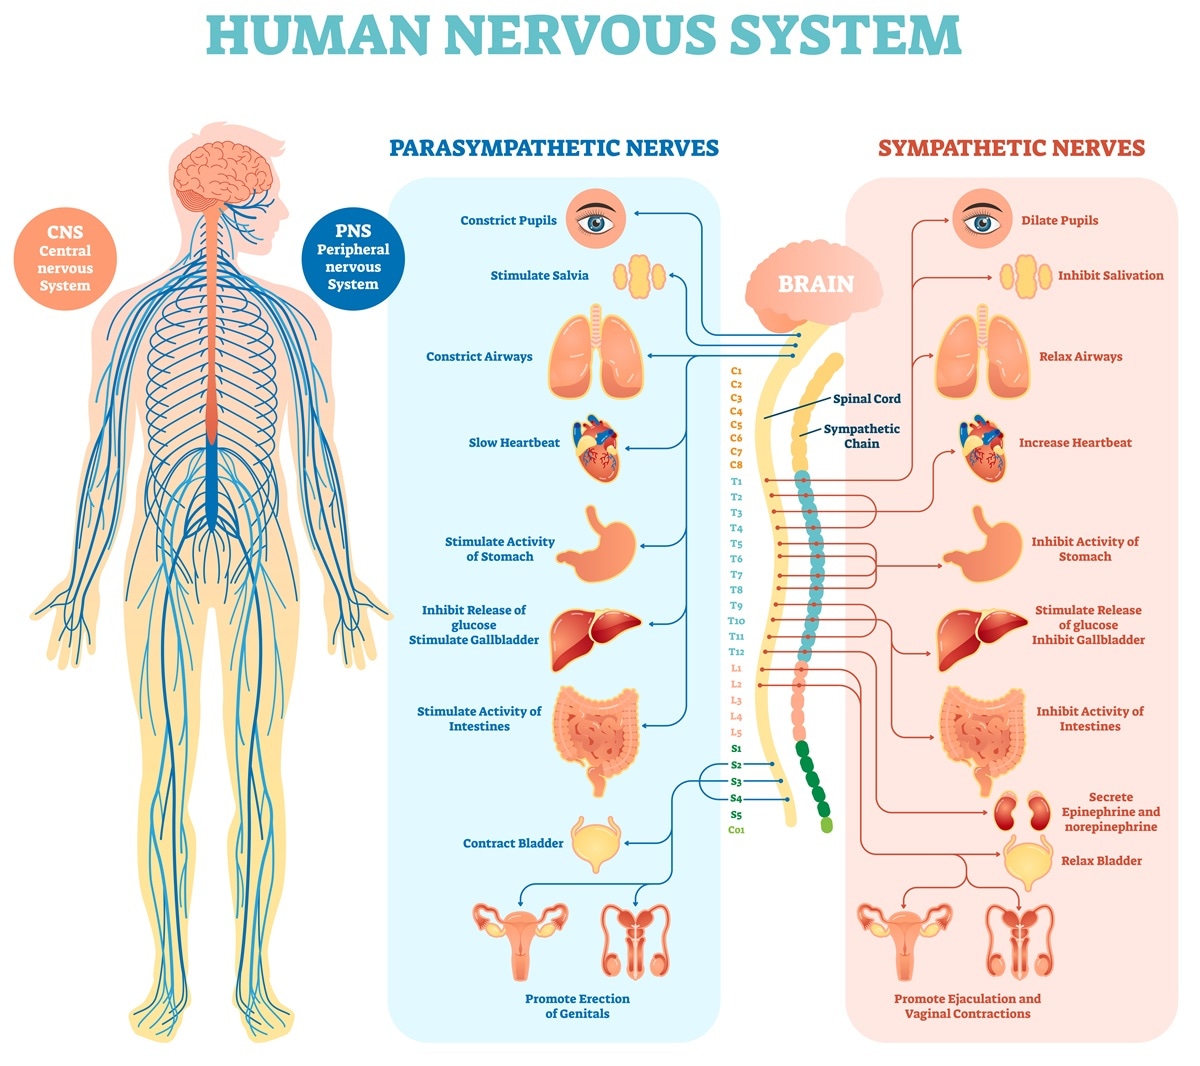 The nervous system is a complex network of nerves and cells that carry messages to and from the brain and spinal cord to various parts of the body. The nervous system includes both the central nervous system and peripheral nervous system. The central nervous system is made up of the brain and spinal cord and the peripheral nervous system is made up of the somatic and the autonomic nervous systems.